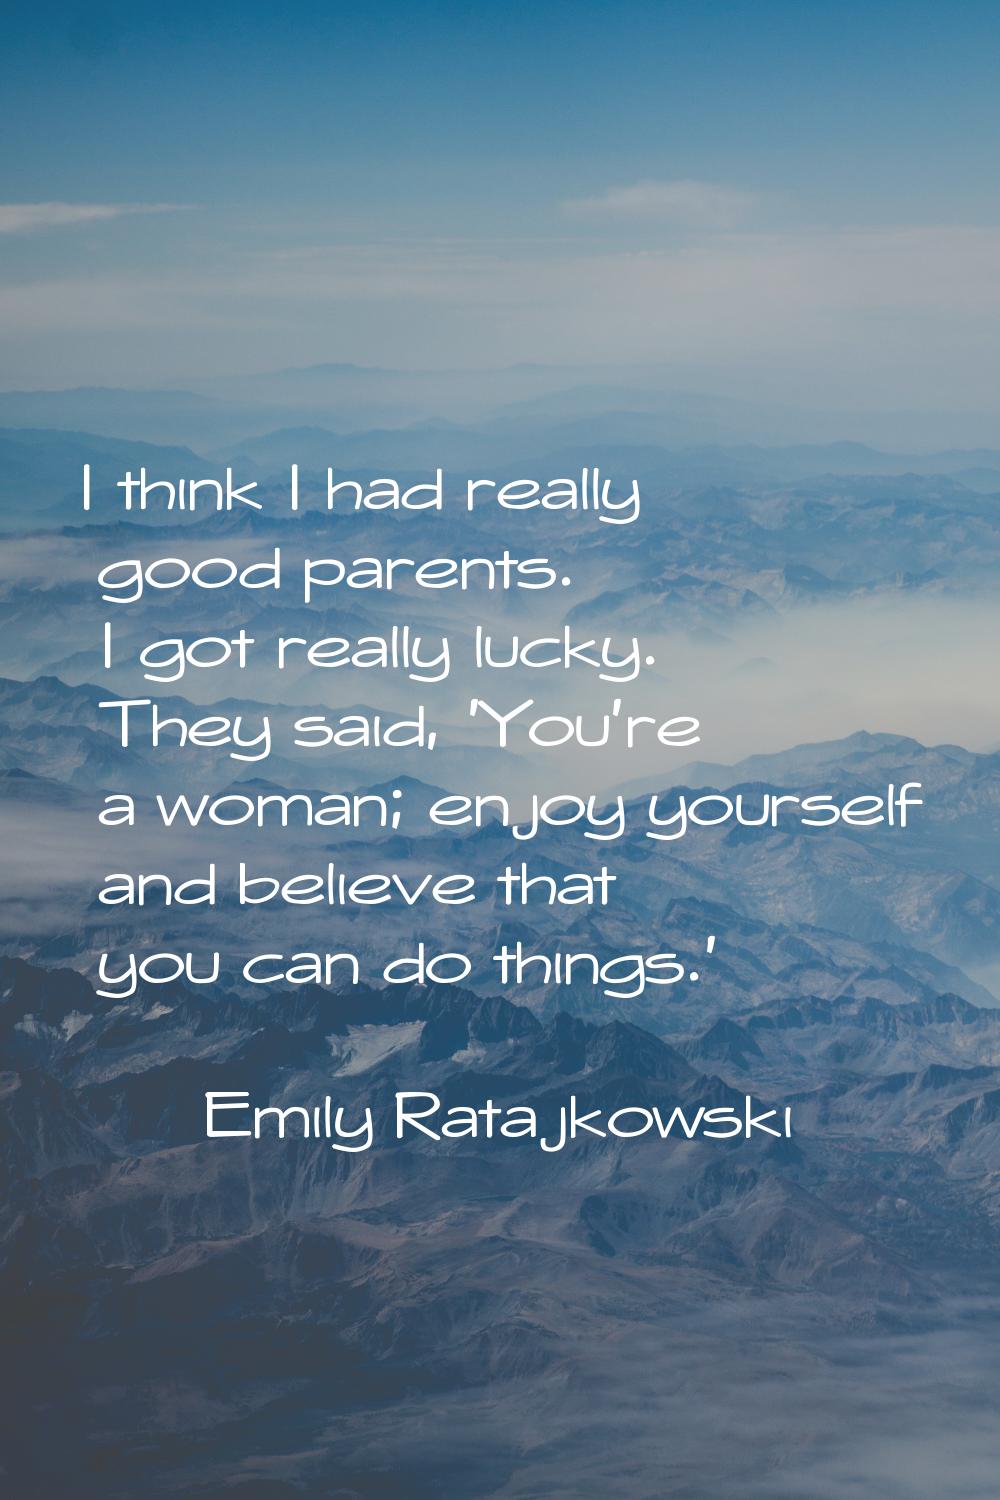 I think I had really good parents. I got really lucky. They said, 'You're a woman; enjoy yourself a